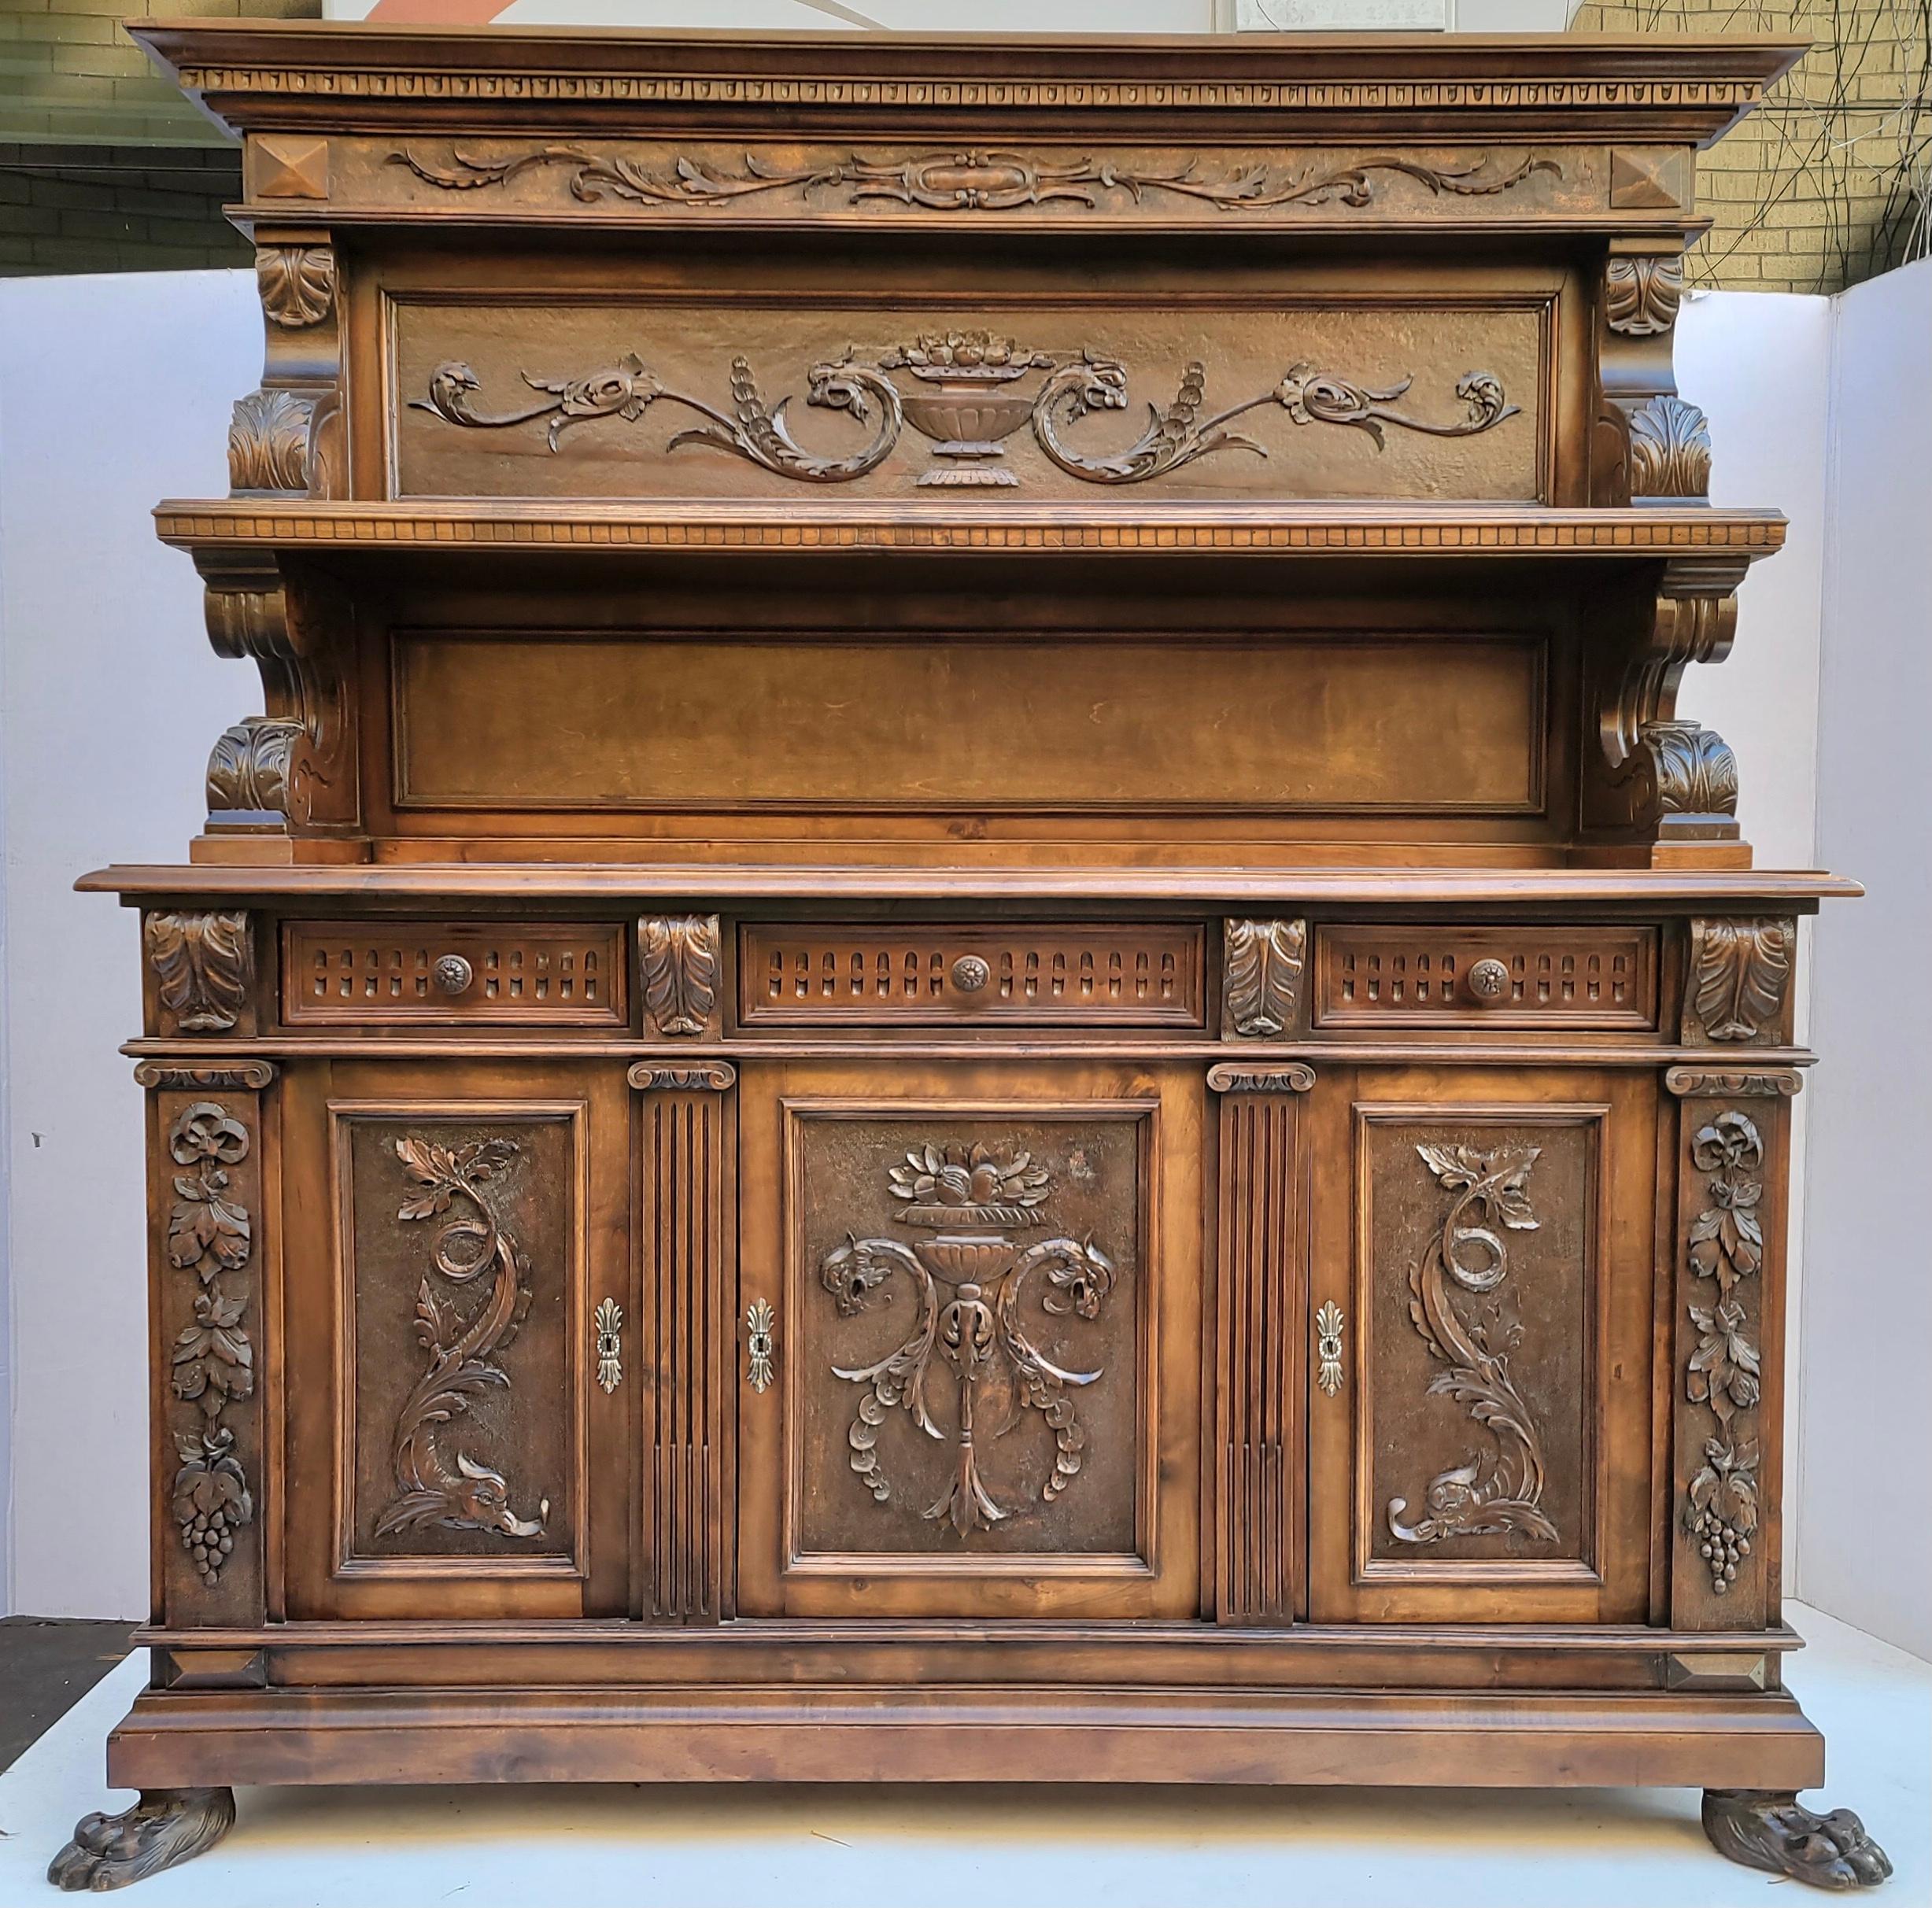 19th Century Neo-Classical Revival Carved Walnut Italian Cabinet / Cupboard, c. 1880